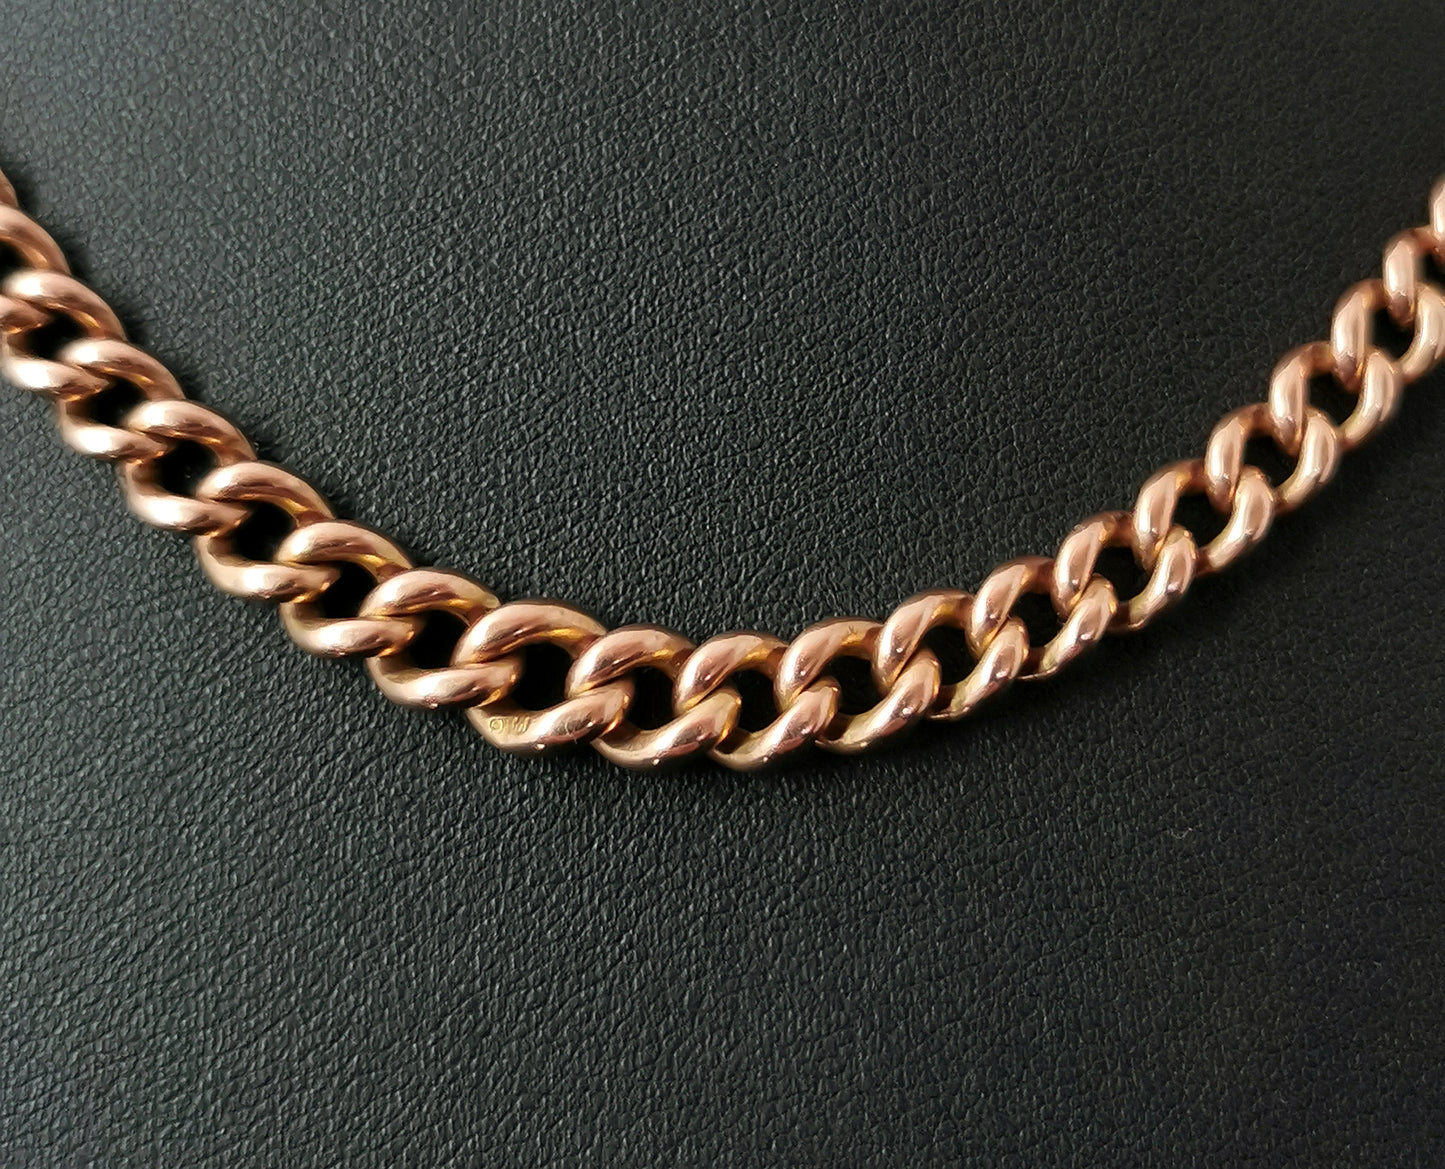 Antique 9ct Rose gold Albert chain, curb link, watch chain necklace